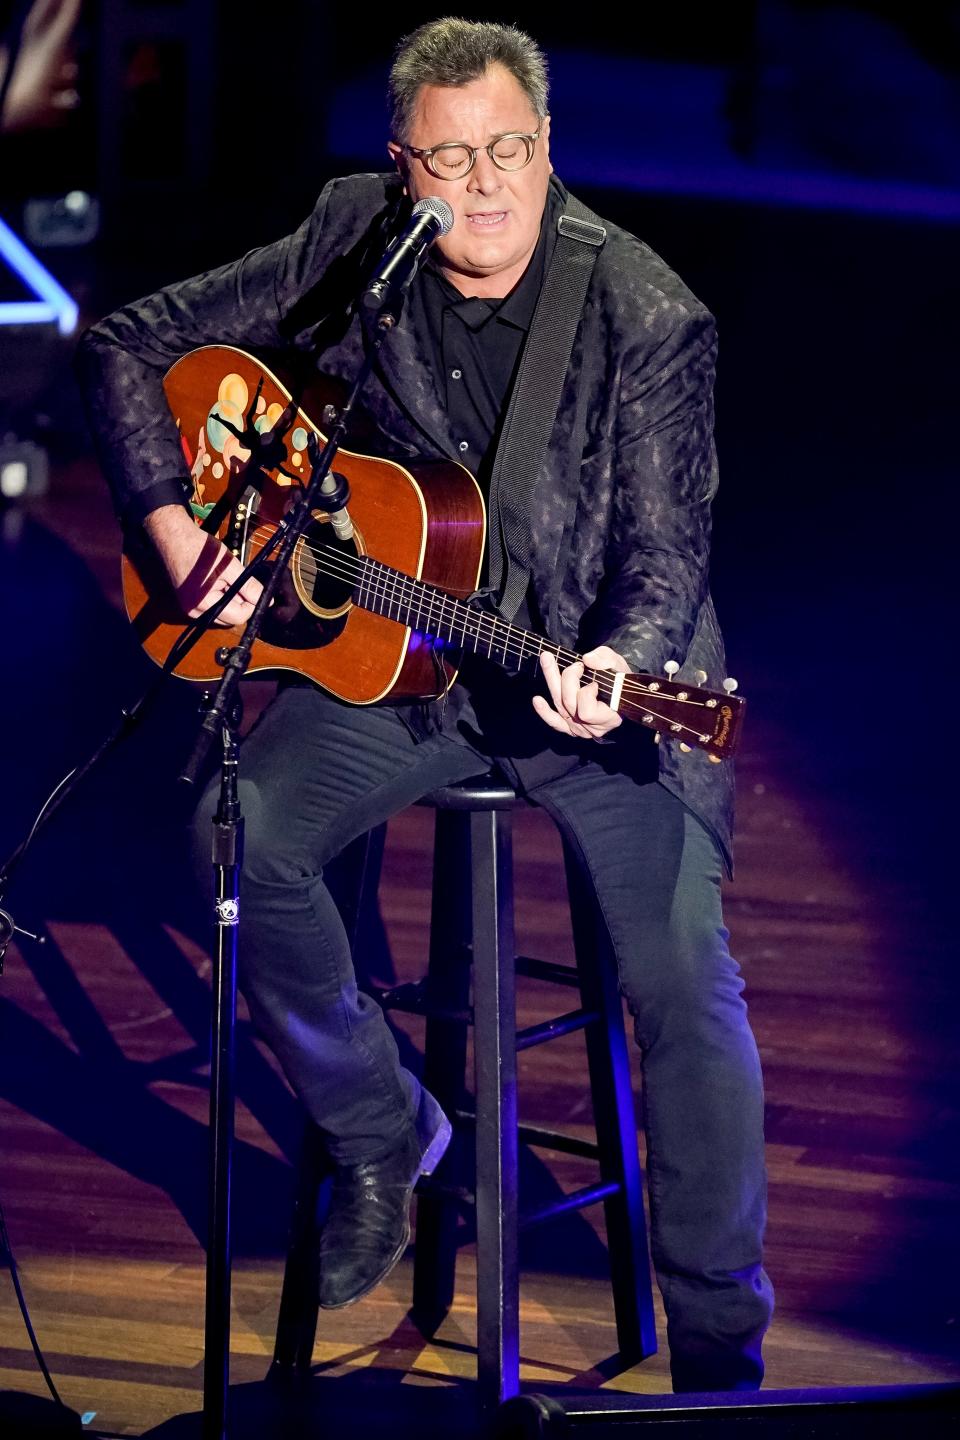 Vince Gill performs during the 15th Annual Academy Of Country Music Honors at Ryman Auditorium in Nashville, Tenn., Wednesday, Aug. 24, 2022.